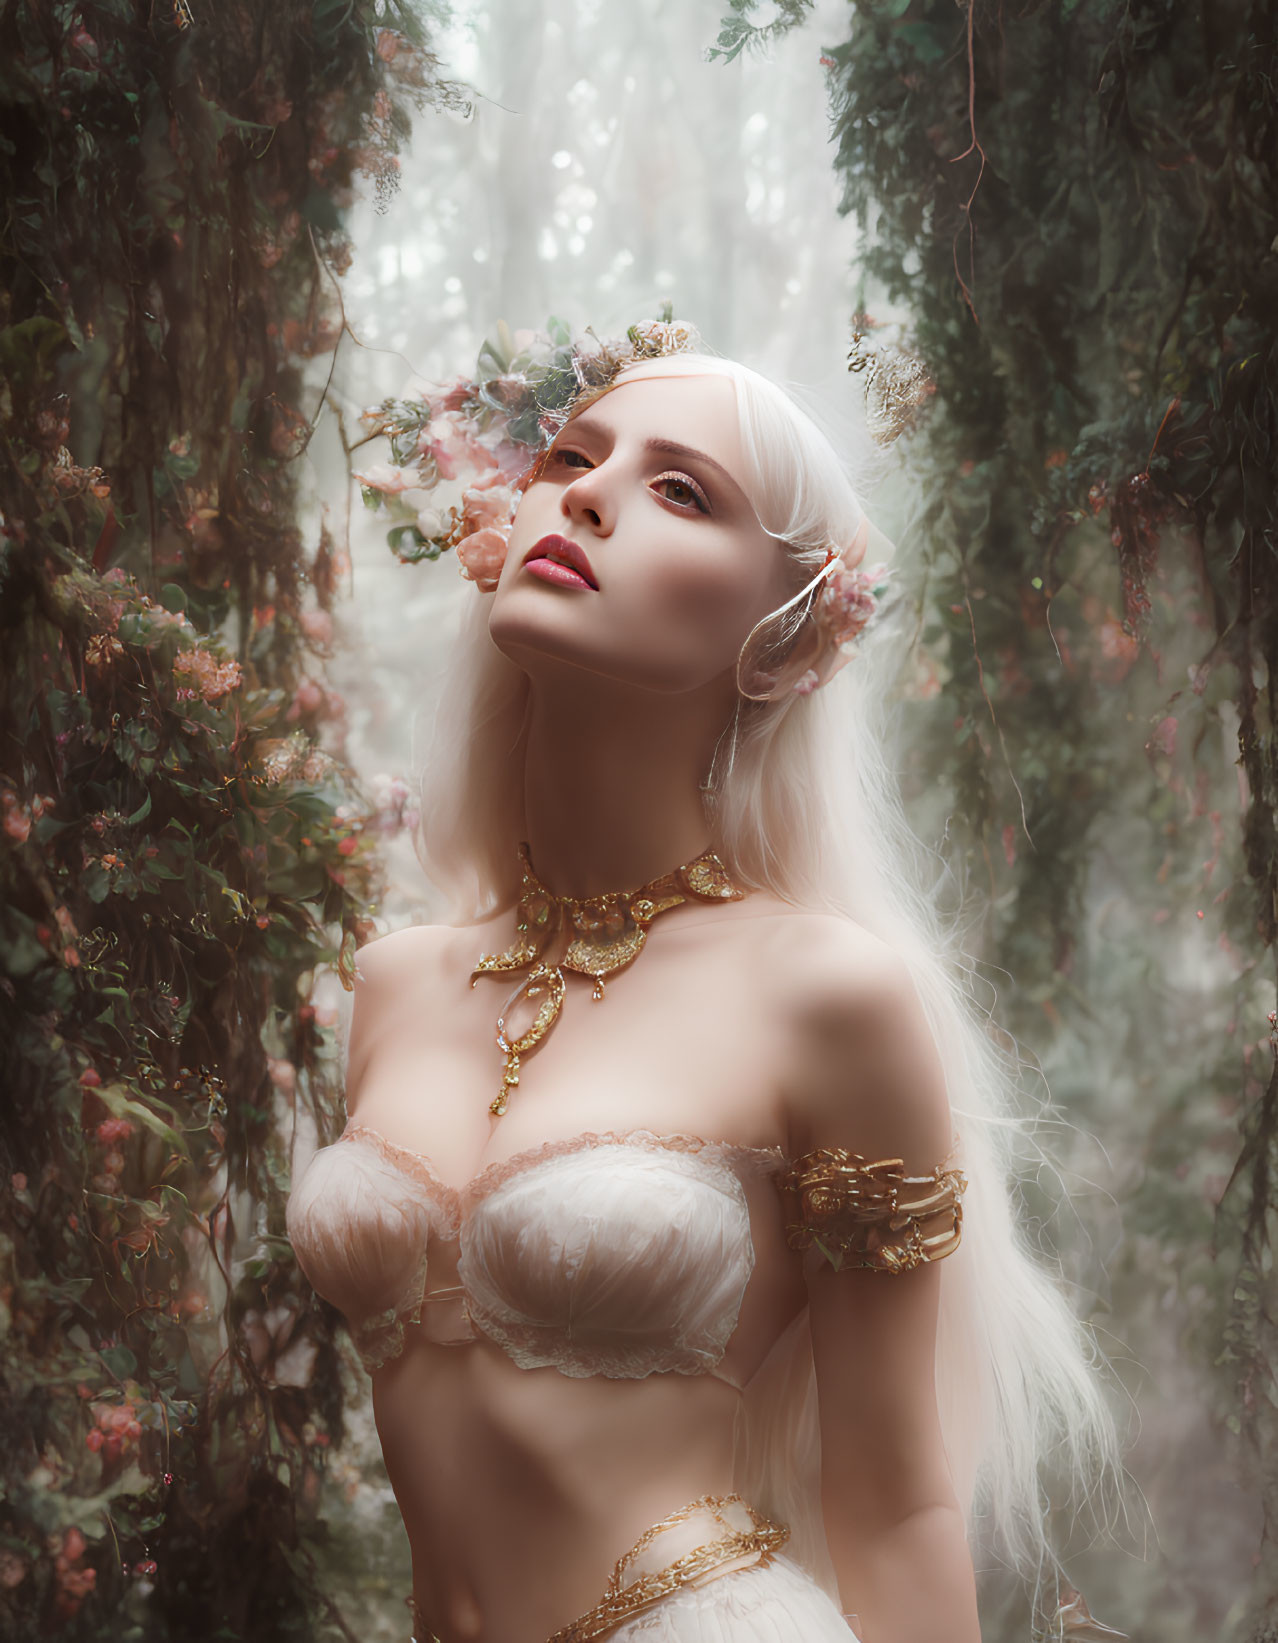 White-haired person with elf-like ears in misty forest with flowers and gold jewelry